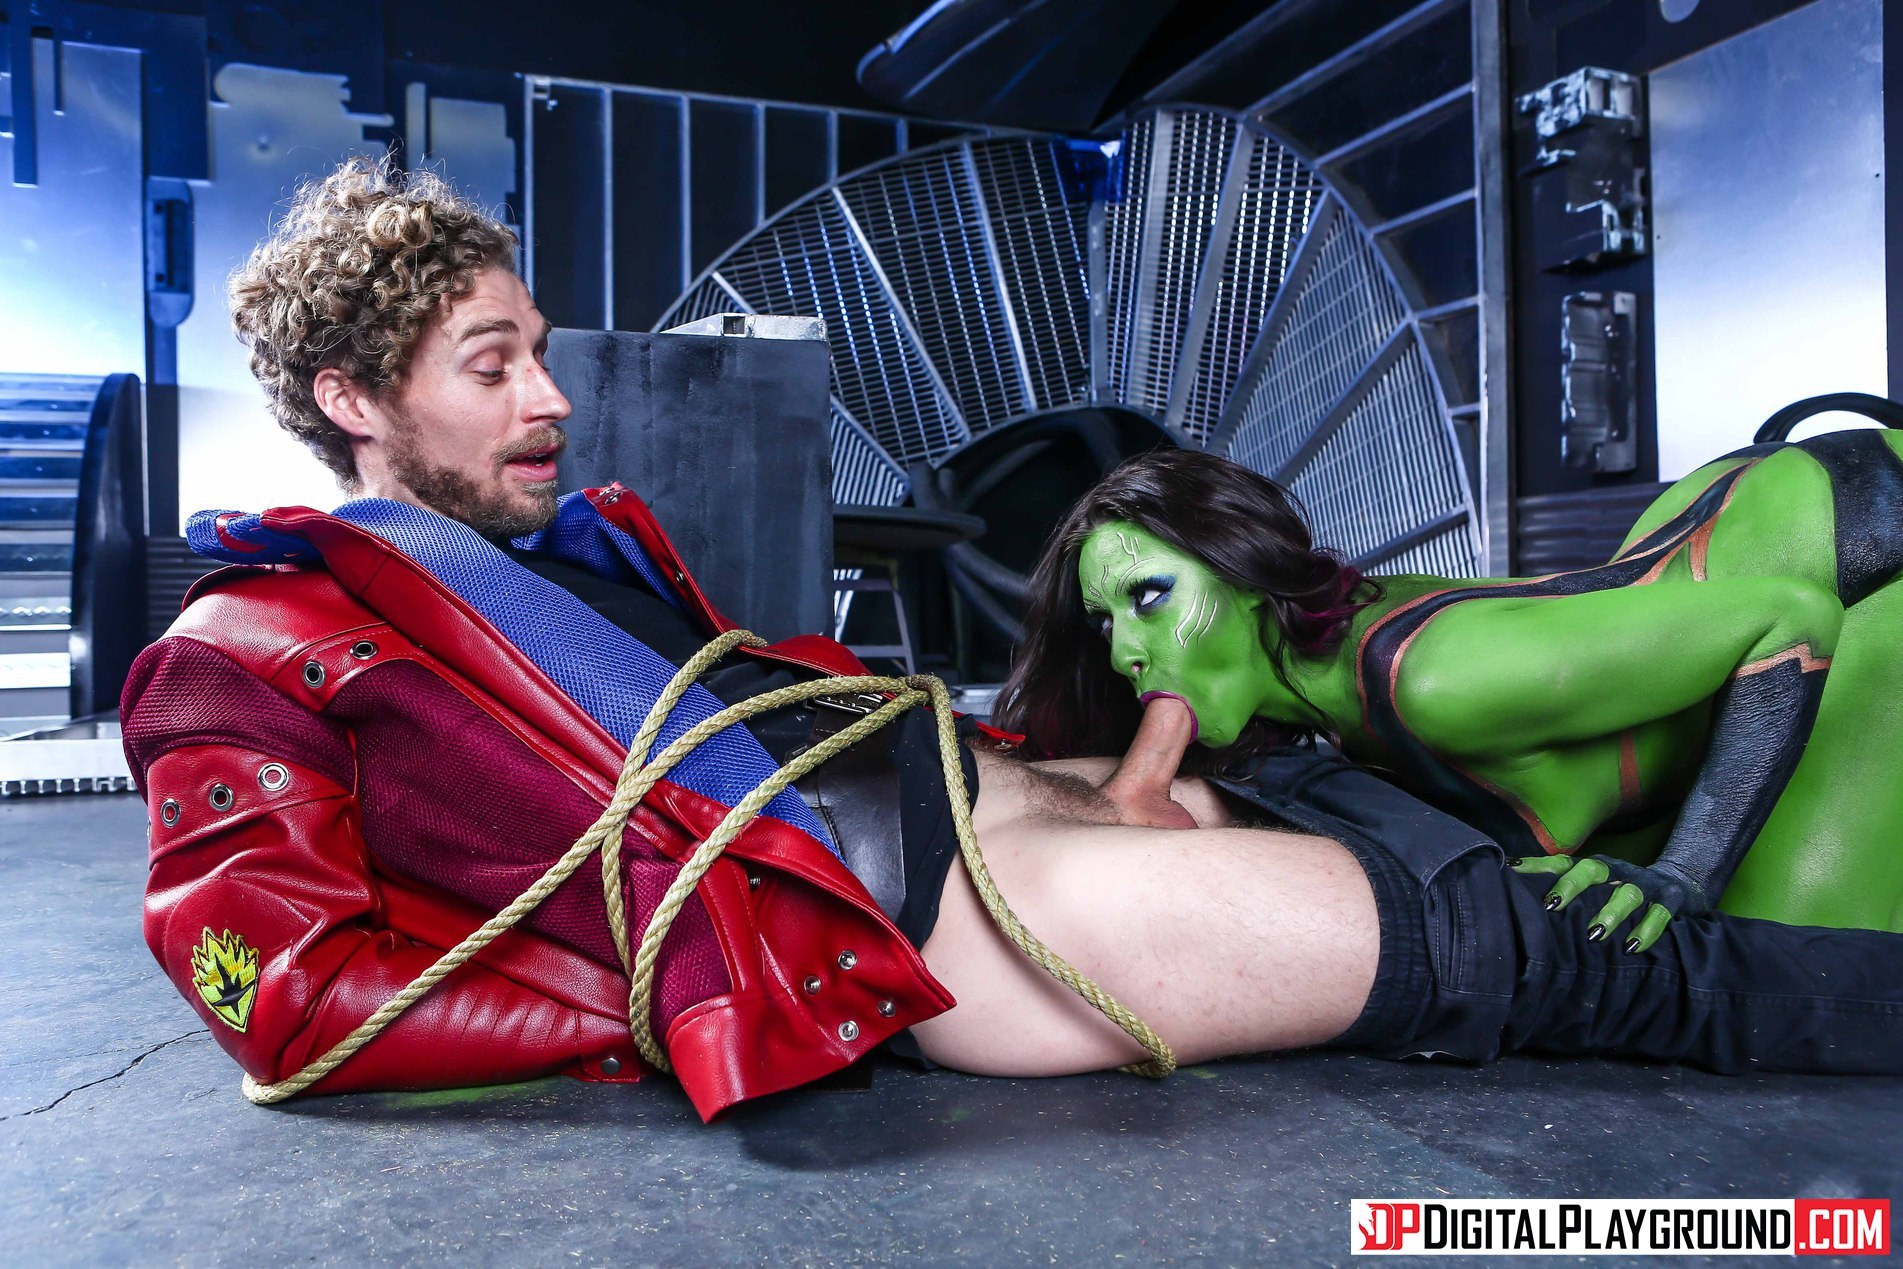 Guardians Of The Galaxy Porn Xxx - Guardians of the galaxy cosplay porn - Best adult videos and photos